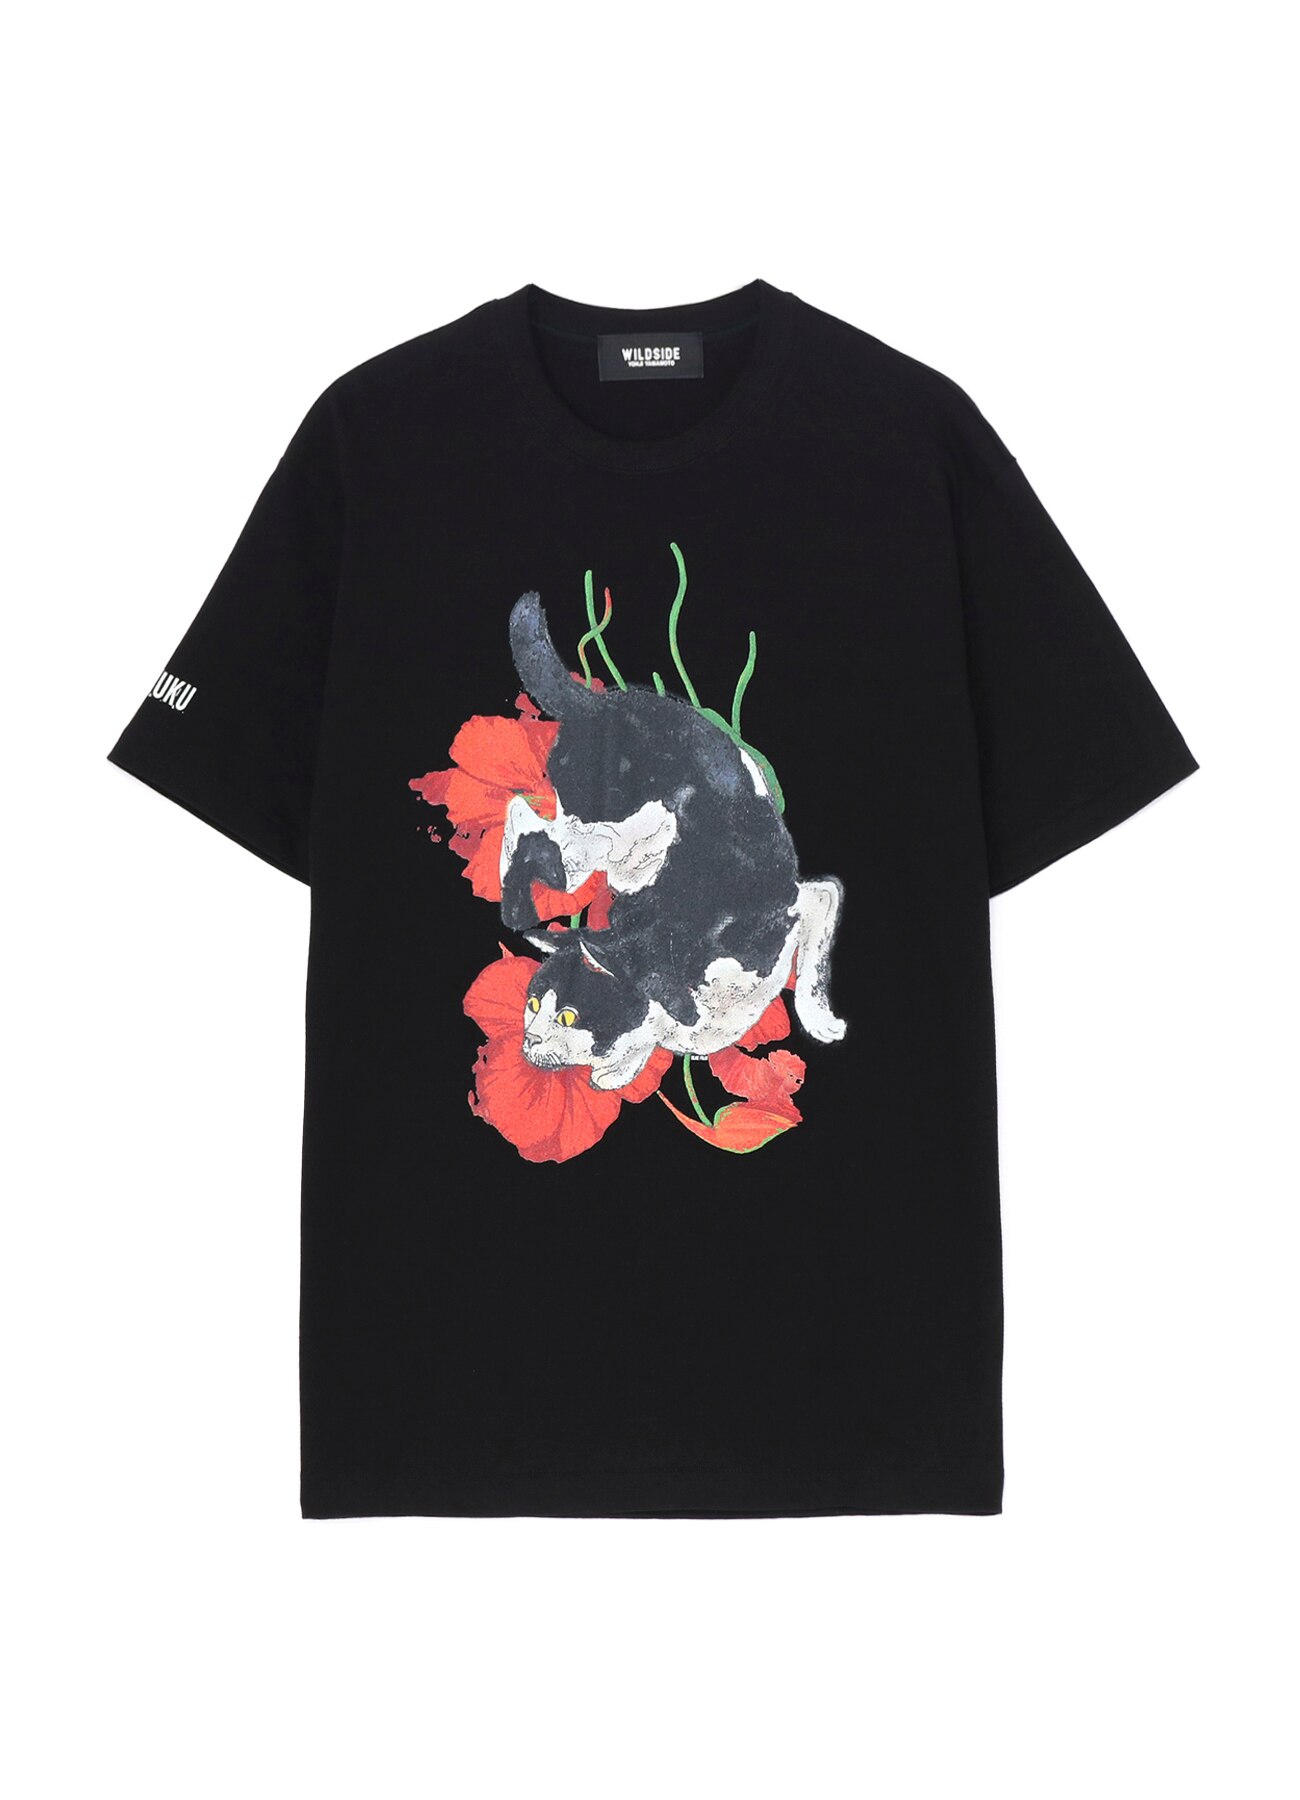 【5/15 12:00(JST) release】HARAJUKU Cat and Flower SS T-shirt